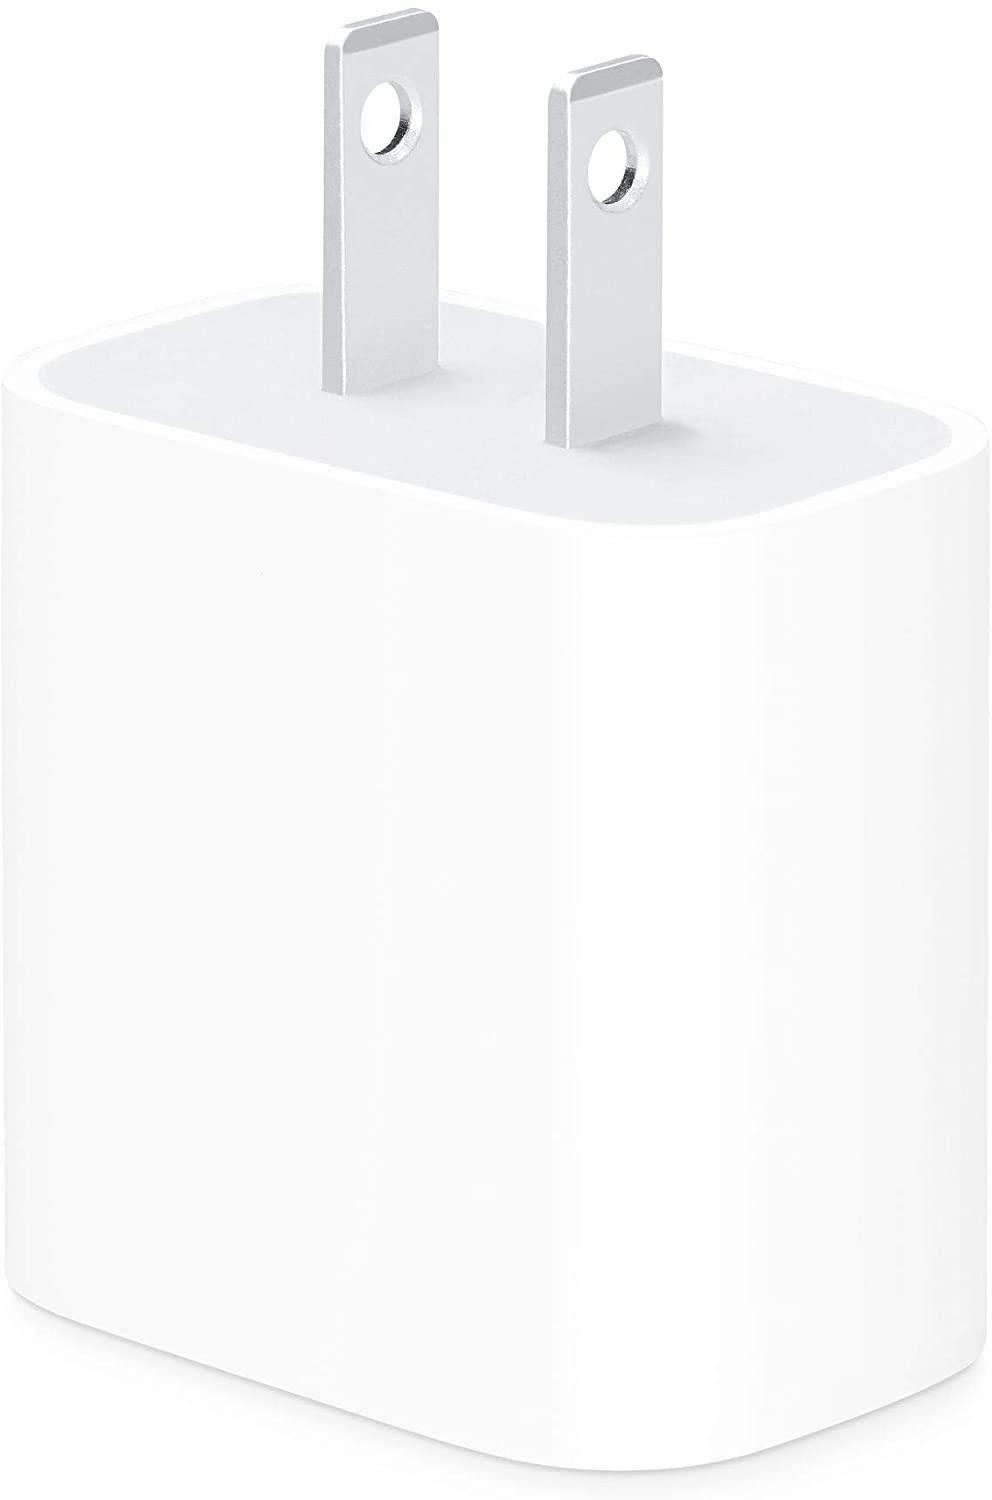 Apple 18W USB-C Power Adapter Charger for iPhone 12 / iPhone 12 Pro / iPhone 12 Pro Max (Original, Imported)-Chargers-dealsplant